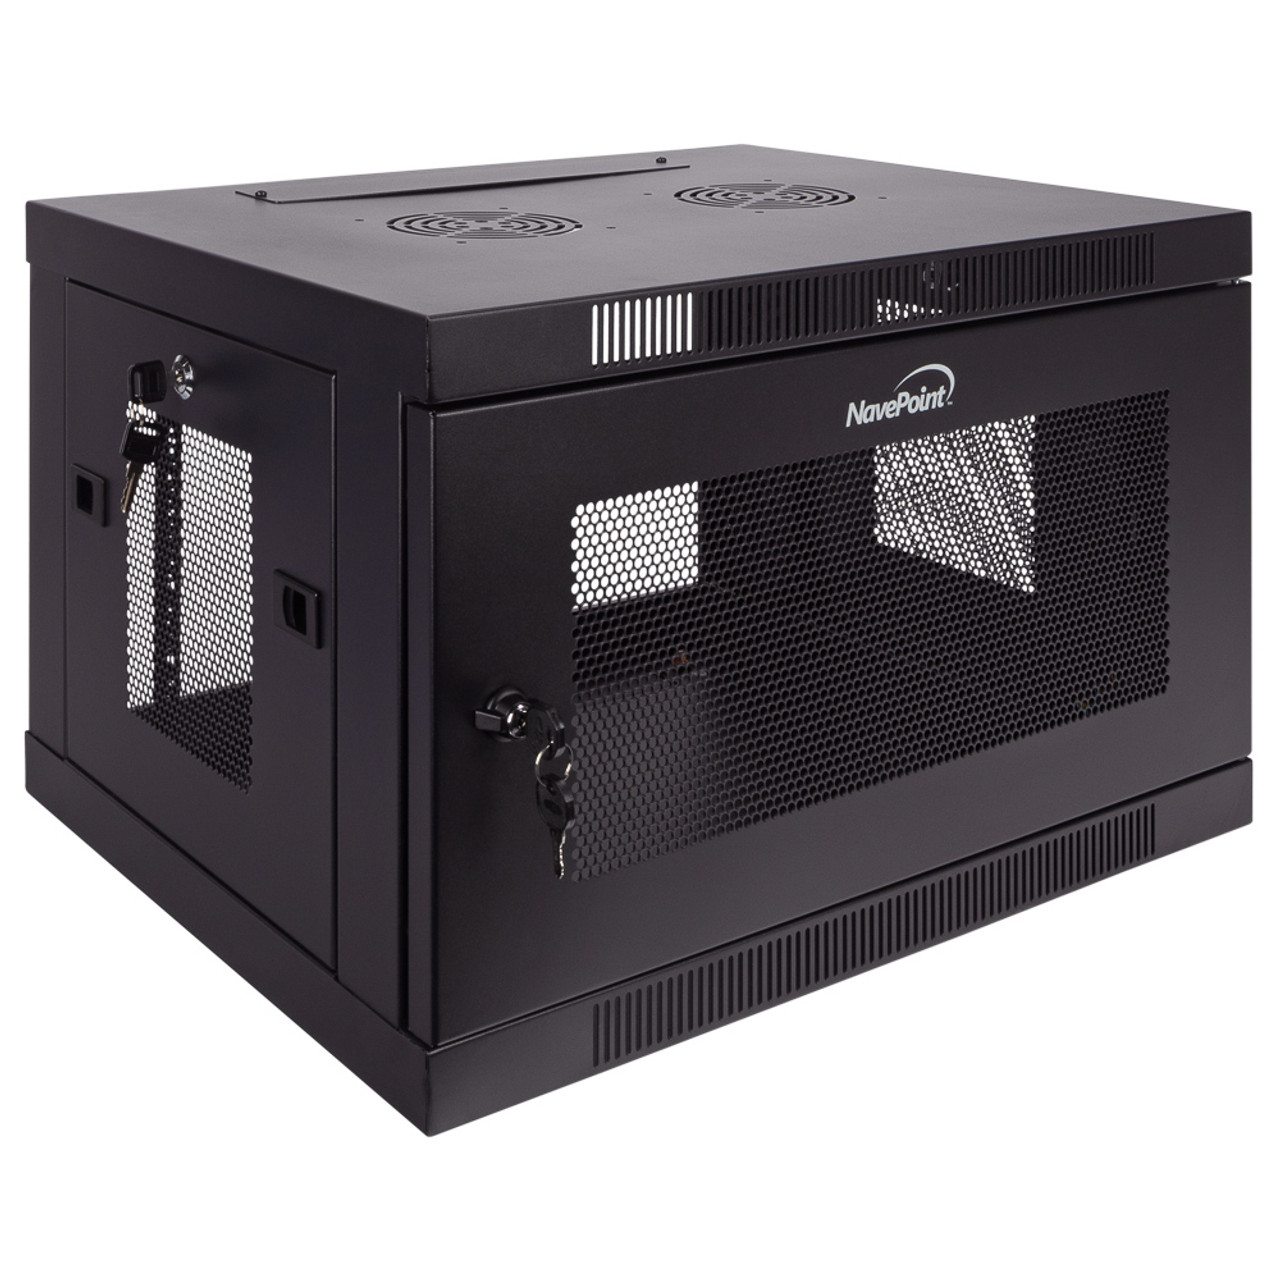 NavePoint 6U Wall Mount Network Cabinet, Perforated Server Enclosure, 19-inch width, 450mm depth